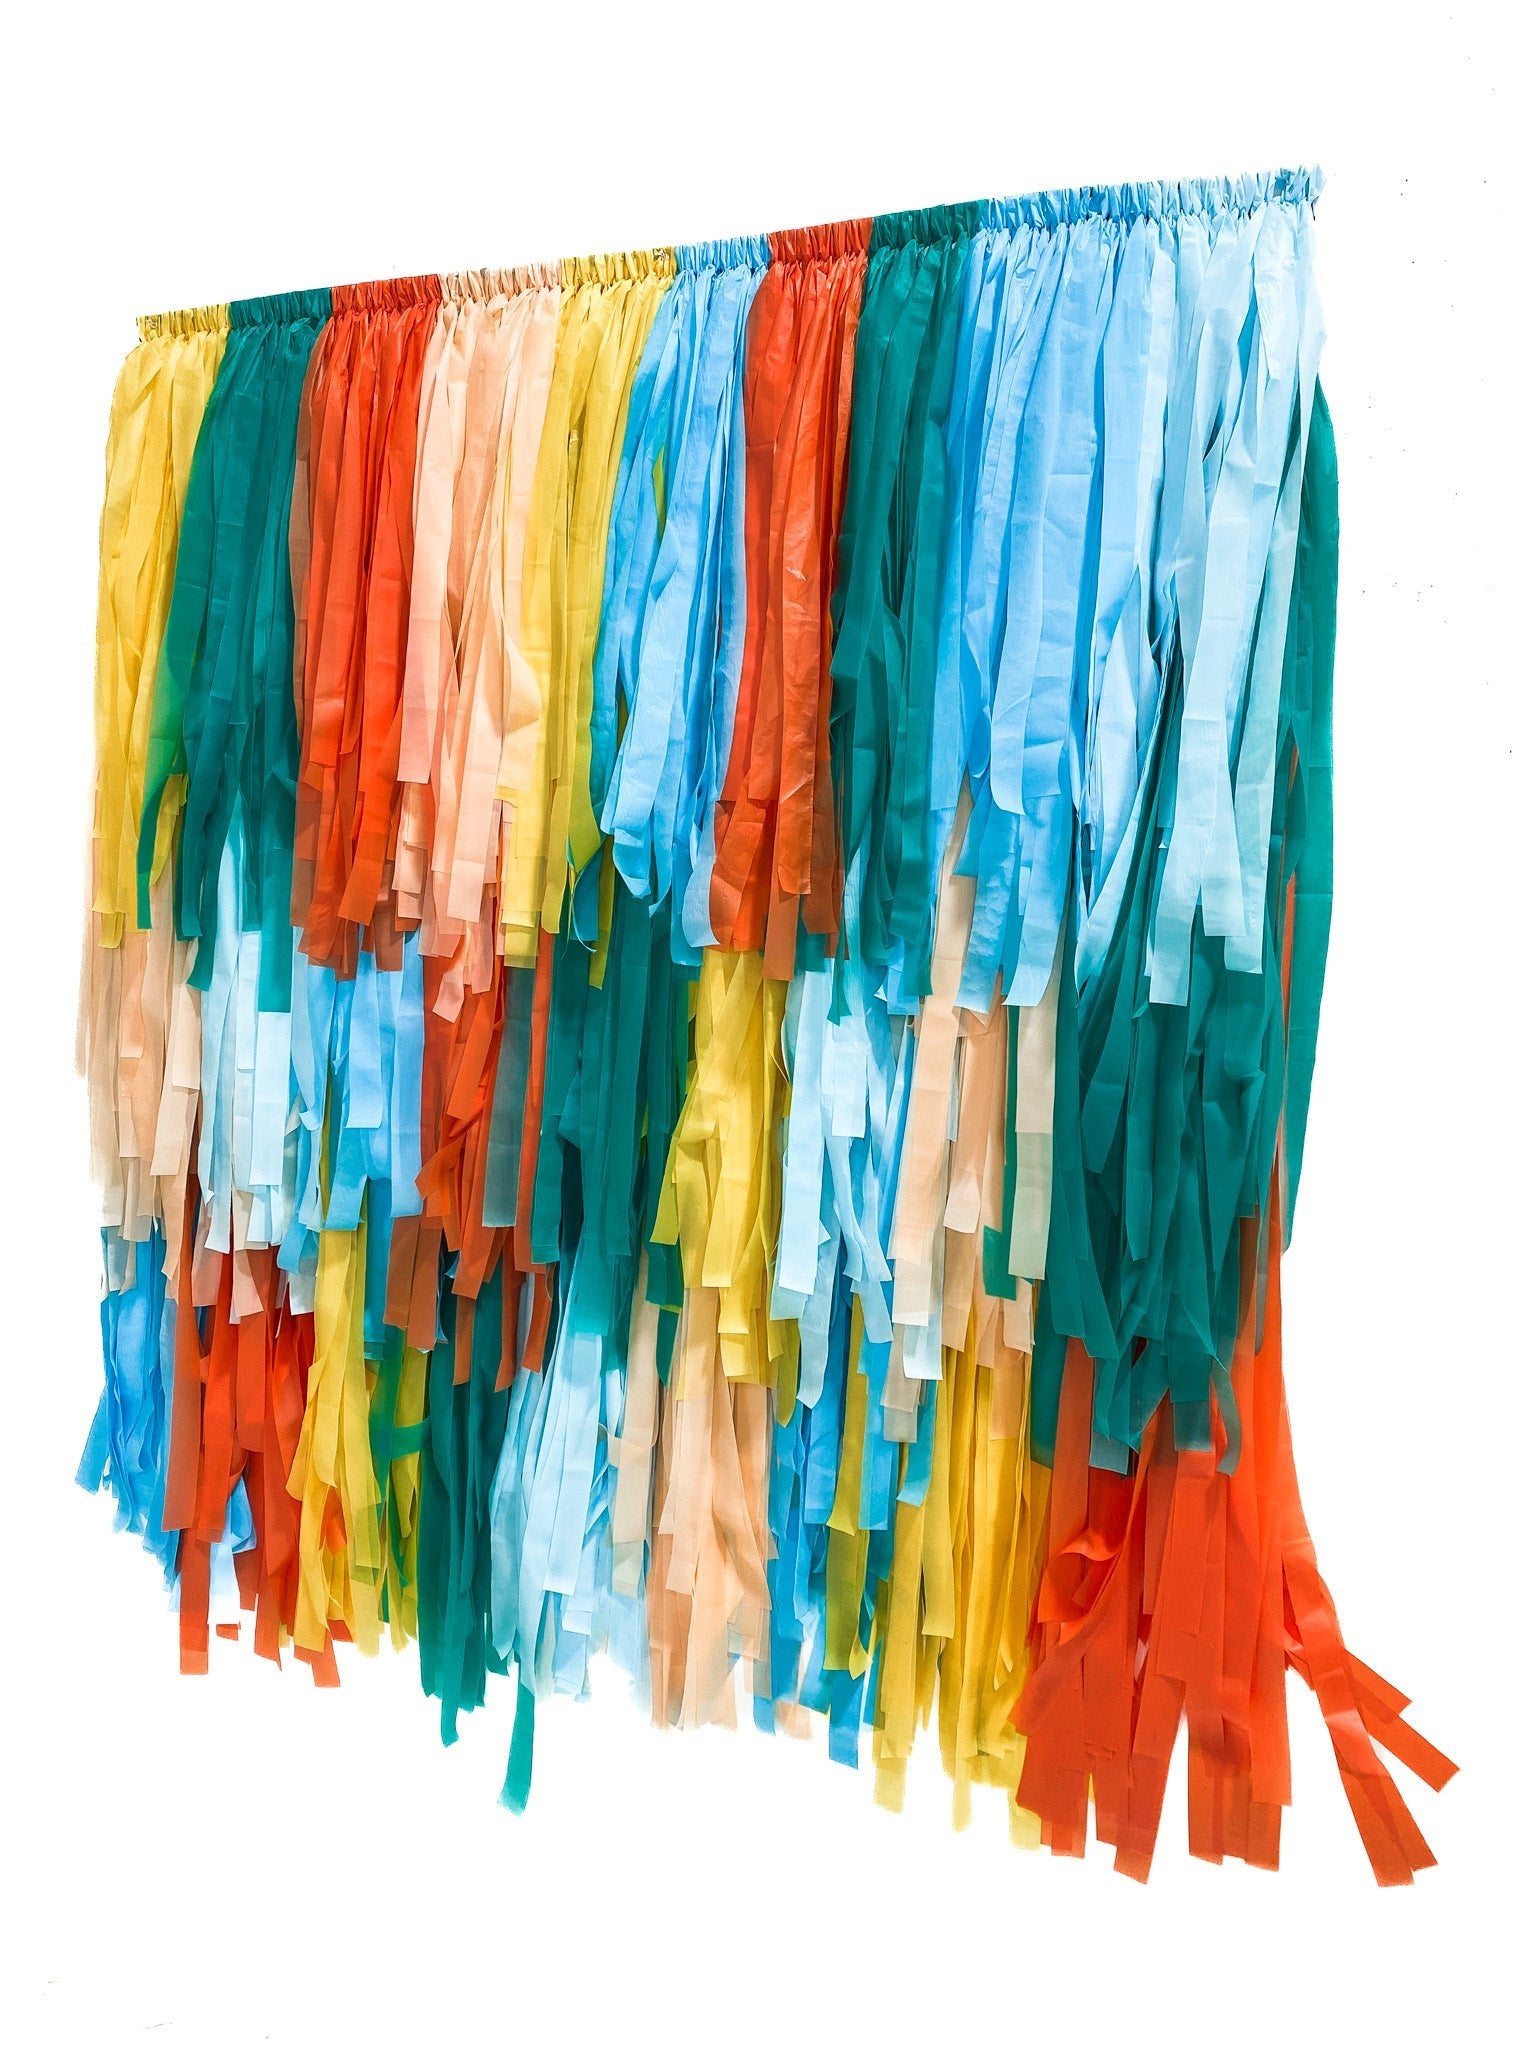 Surfs Up Backdrop - Oh My Darling Party Co-BLUE BACKDROPdefaultGREEN BACKDROP #Fringe_Backdrop#